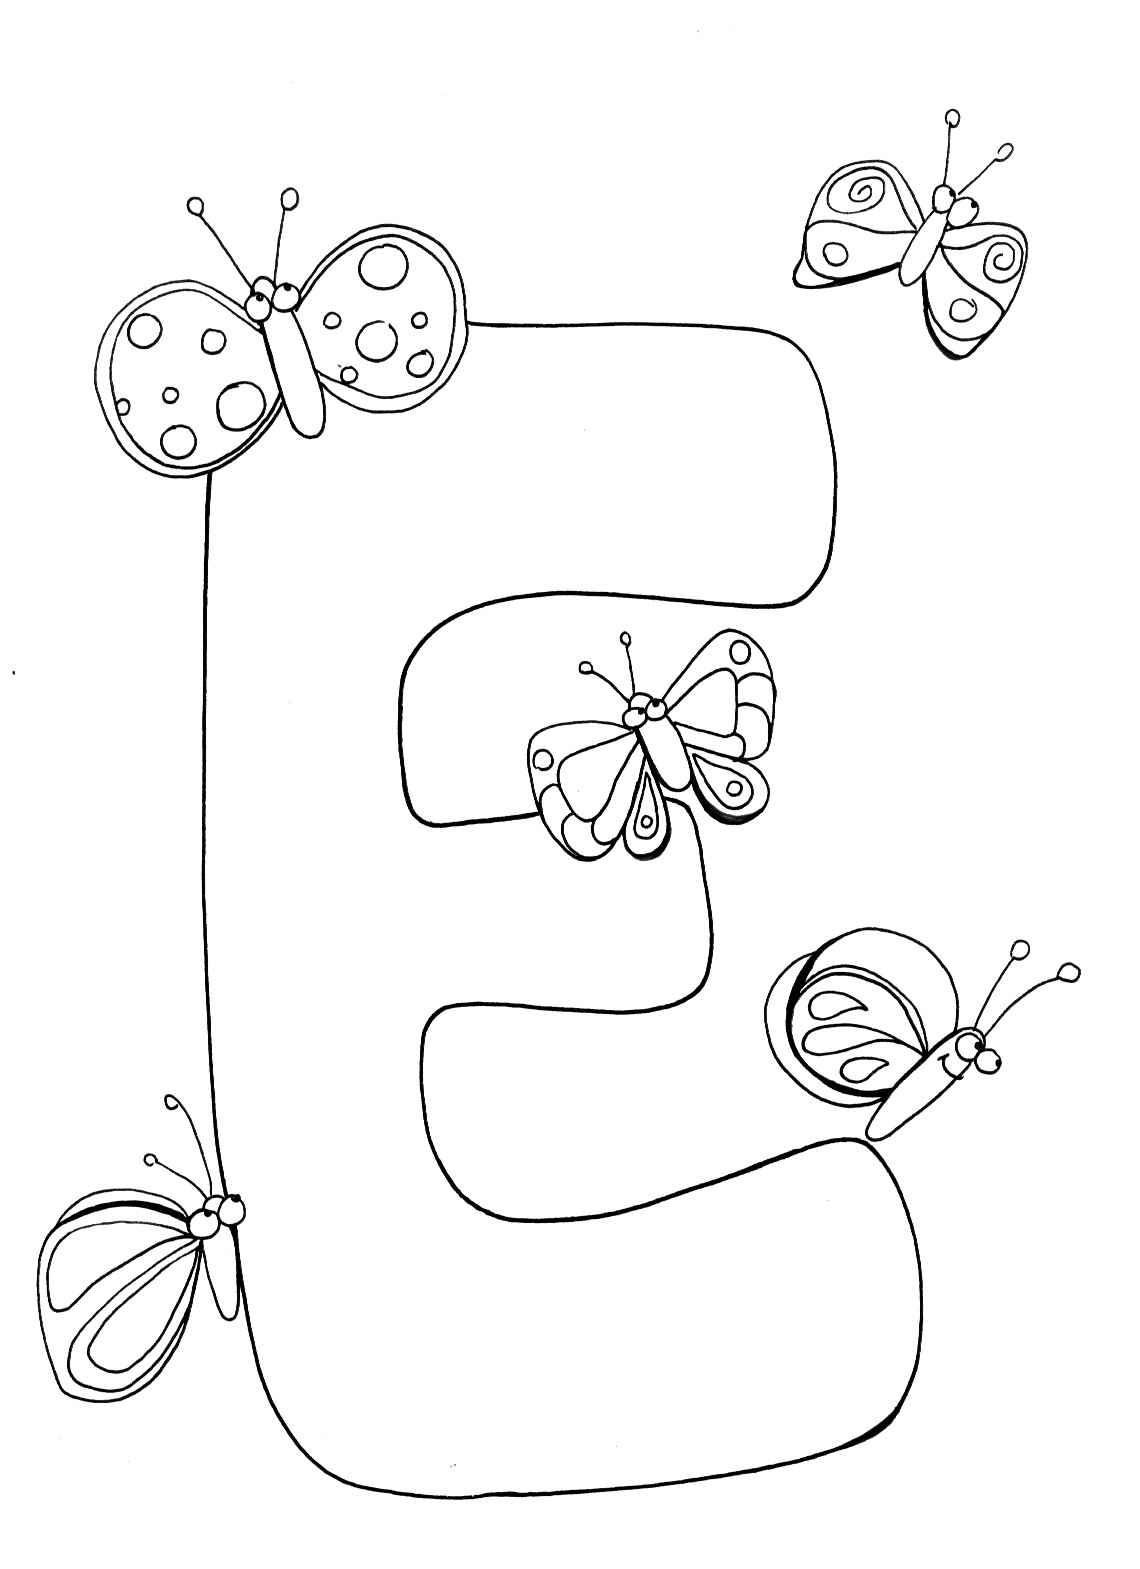 Letter E Coloring Pages For Toddlers
 letter e coloring pages printable letter e coloring pages